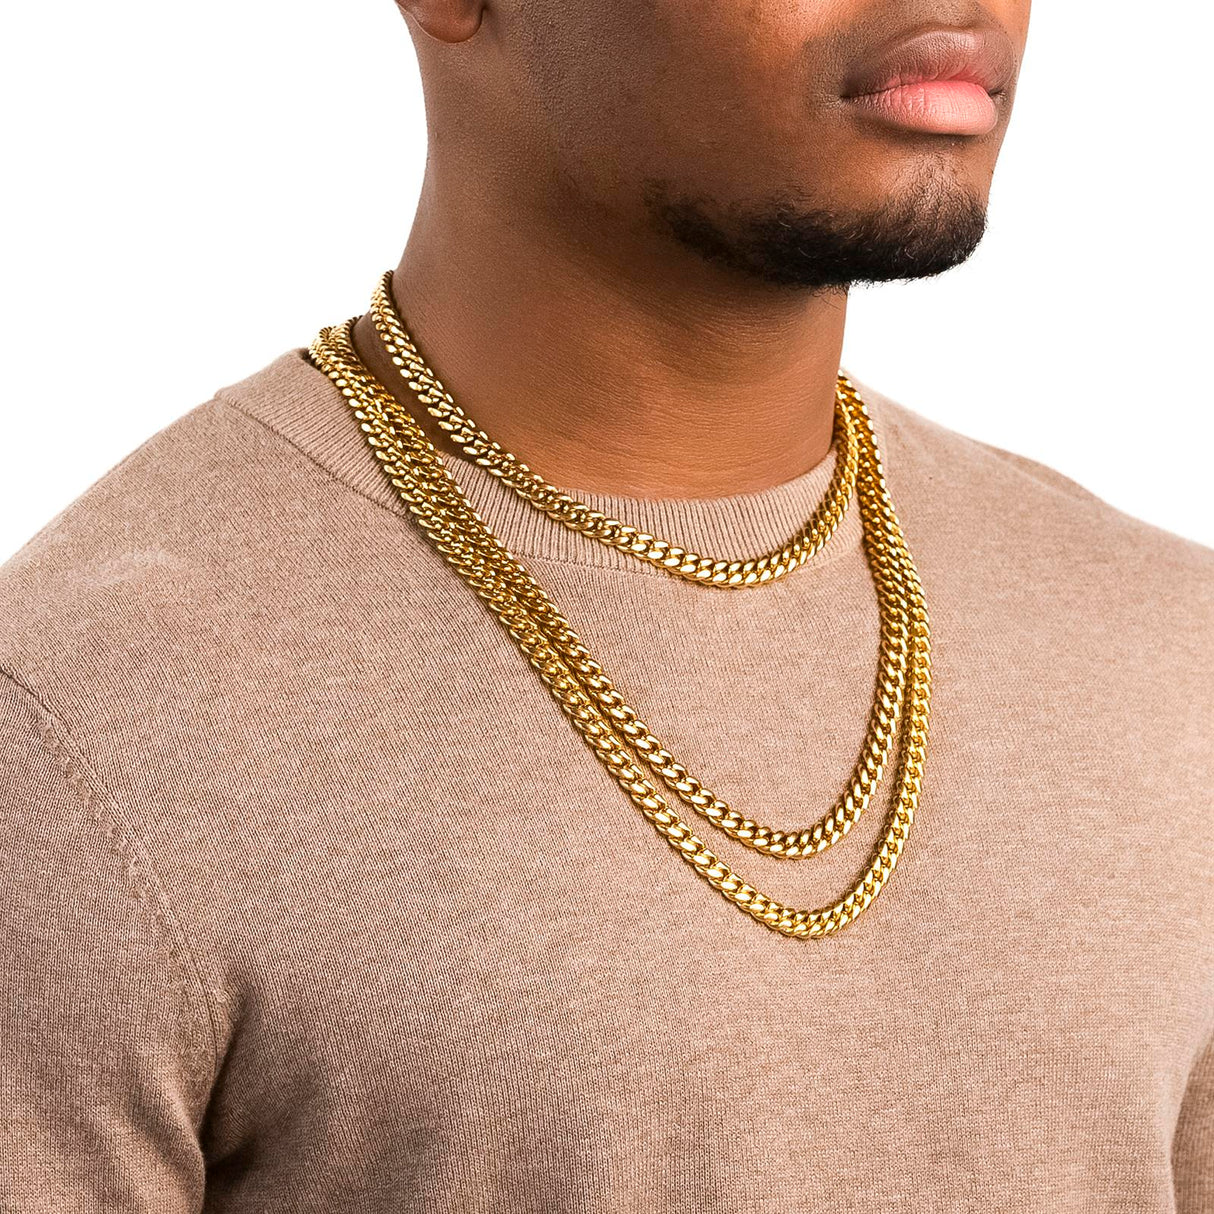 Men's Gold Chain - 8mm Miami Cuban Link - The Gold Gods - 24 inch 1